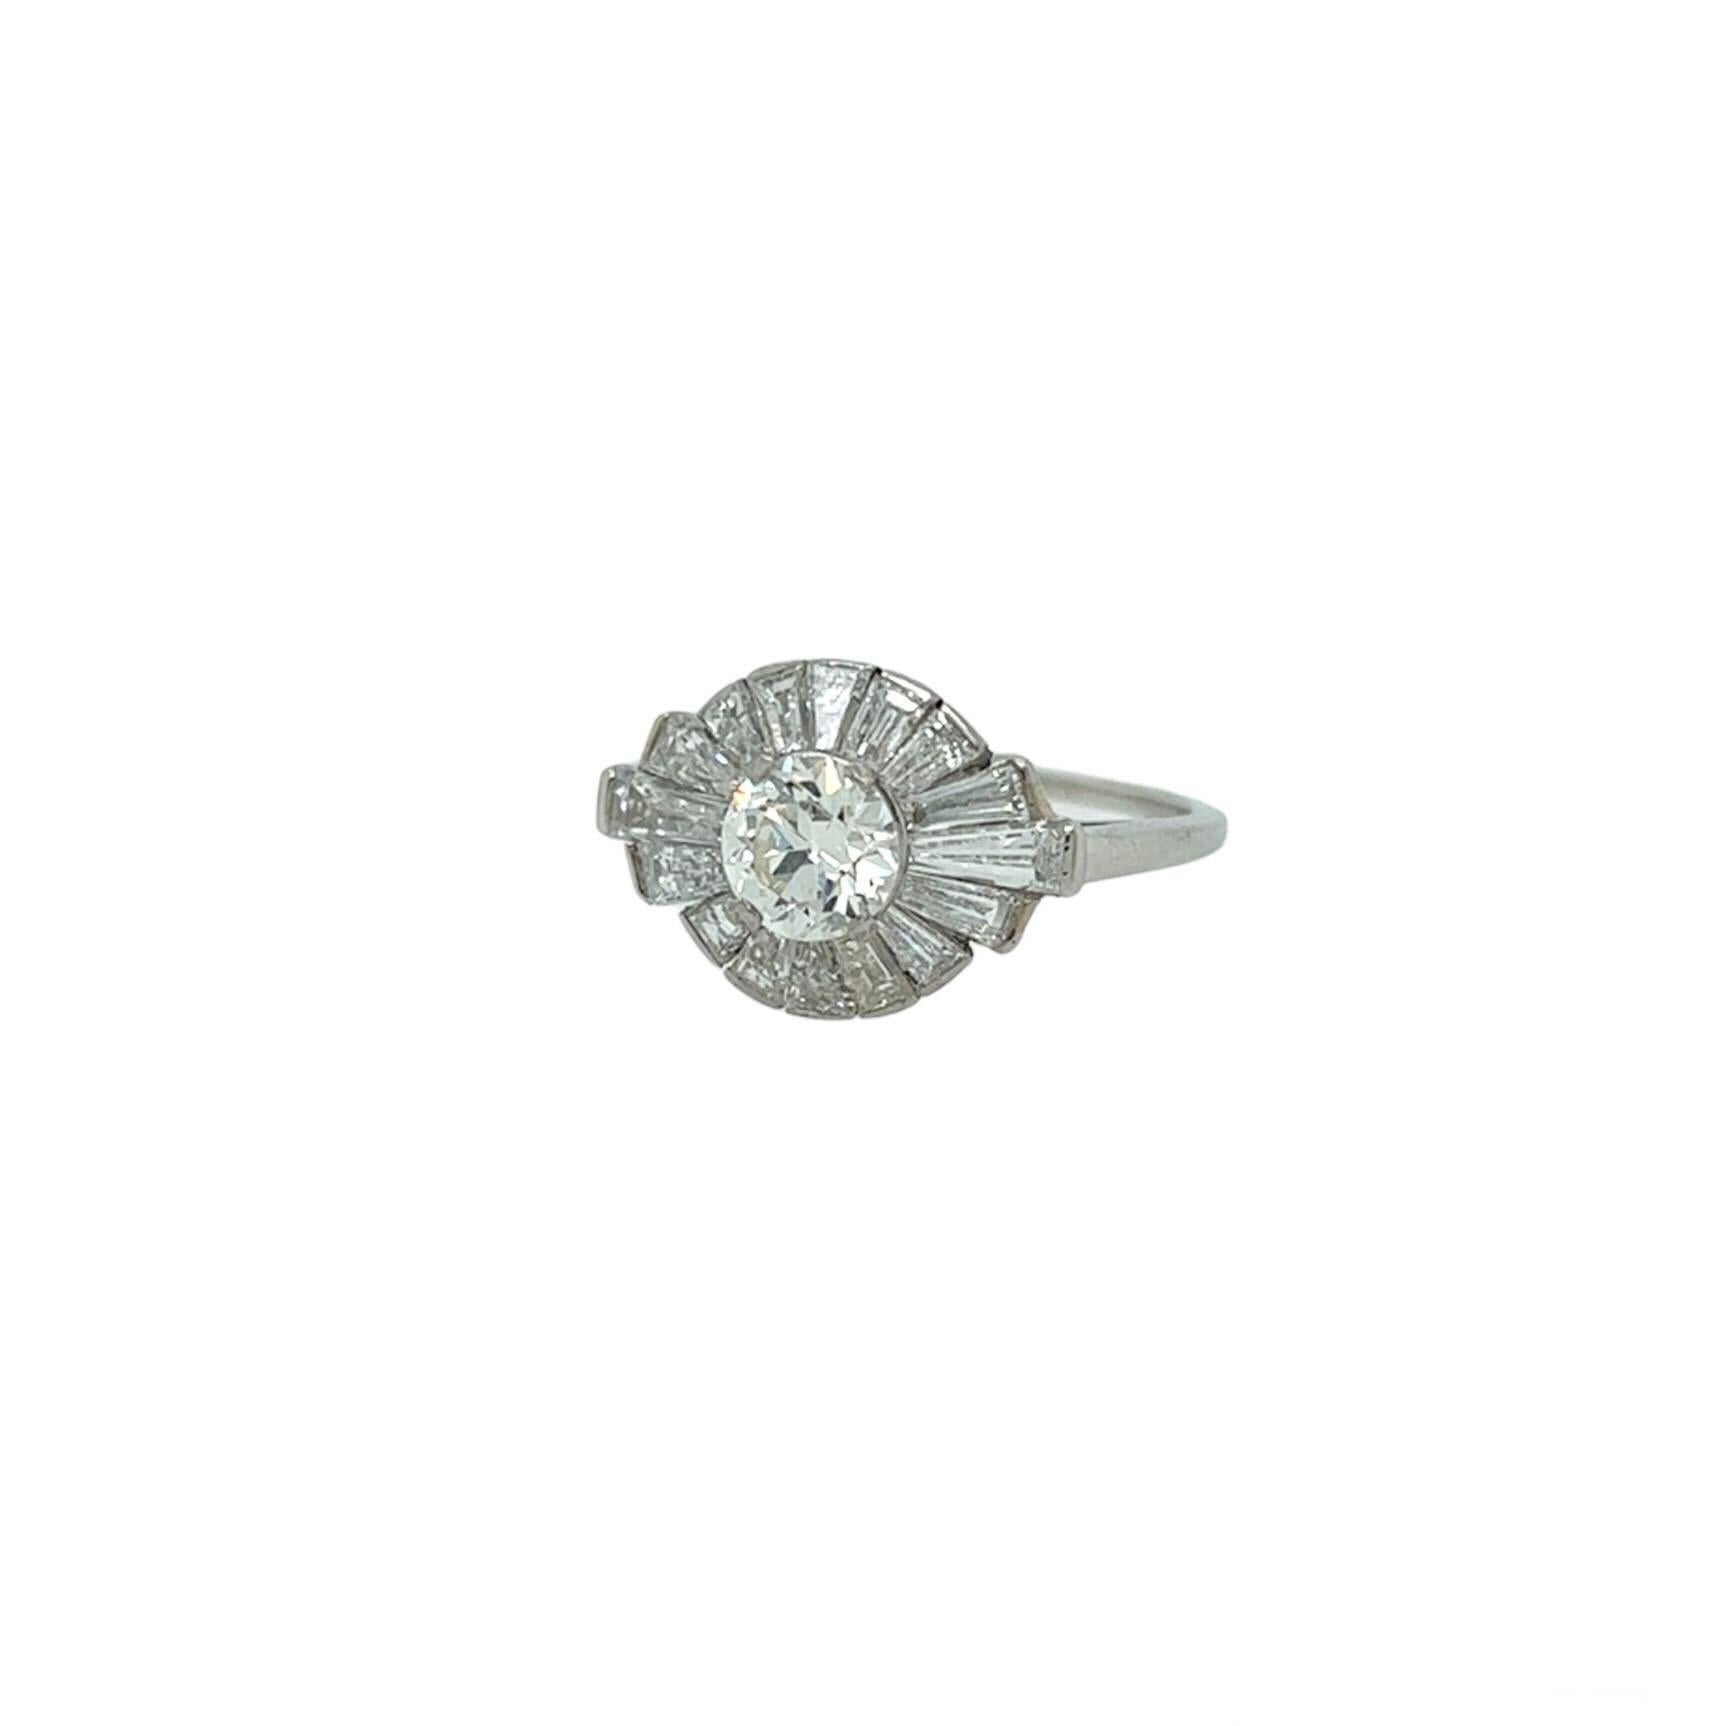 A platinum and diamond ring, Raymond Yard.  Centering a brilliant cut diamond weighing 0.67 carat surrounded by sixteen tapered baguette diamonds in a radiating pattern.  Total diamond weight approximately 2.03 carats.  Size approximately 7 1/2. 